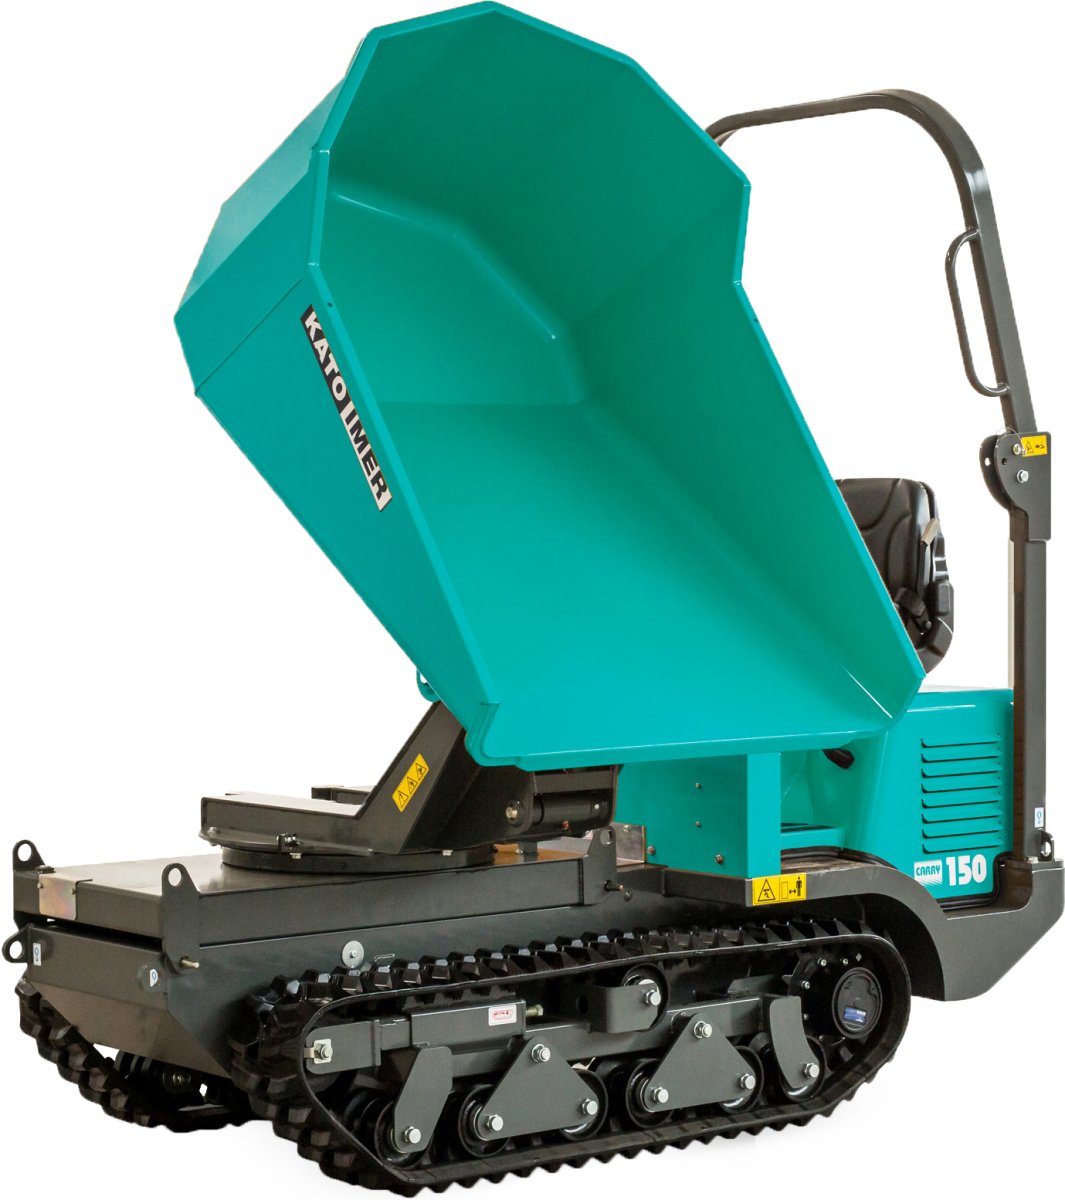 Carry 150 Concrete Track Buggy - Diamond Tool Store